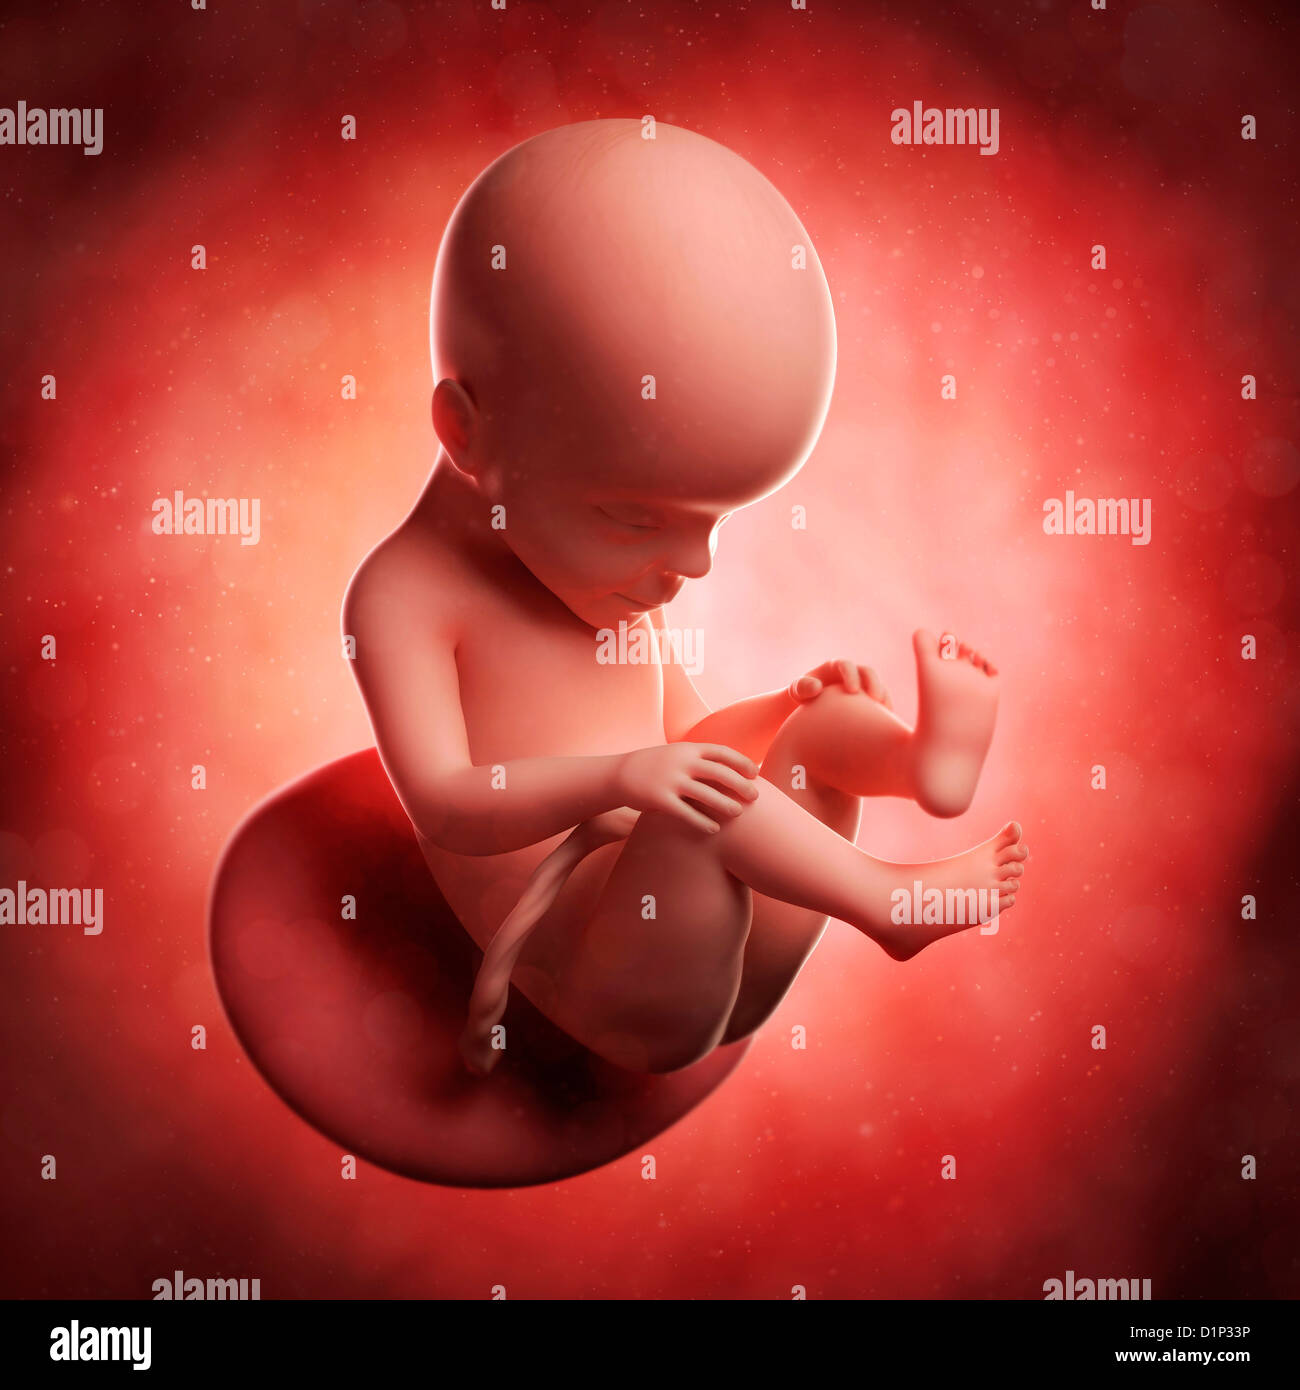 Baby In The Womb Stock Photos & Baby In The Womb Stock Images - Alamy1300 x 1390